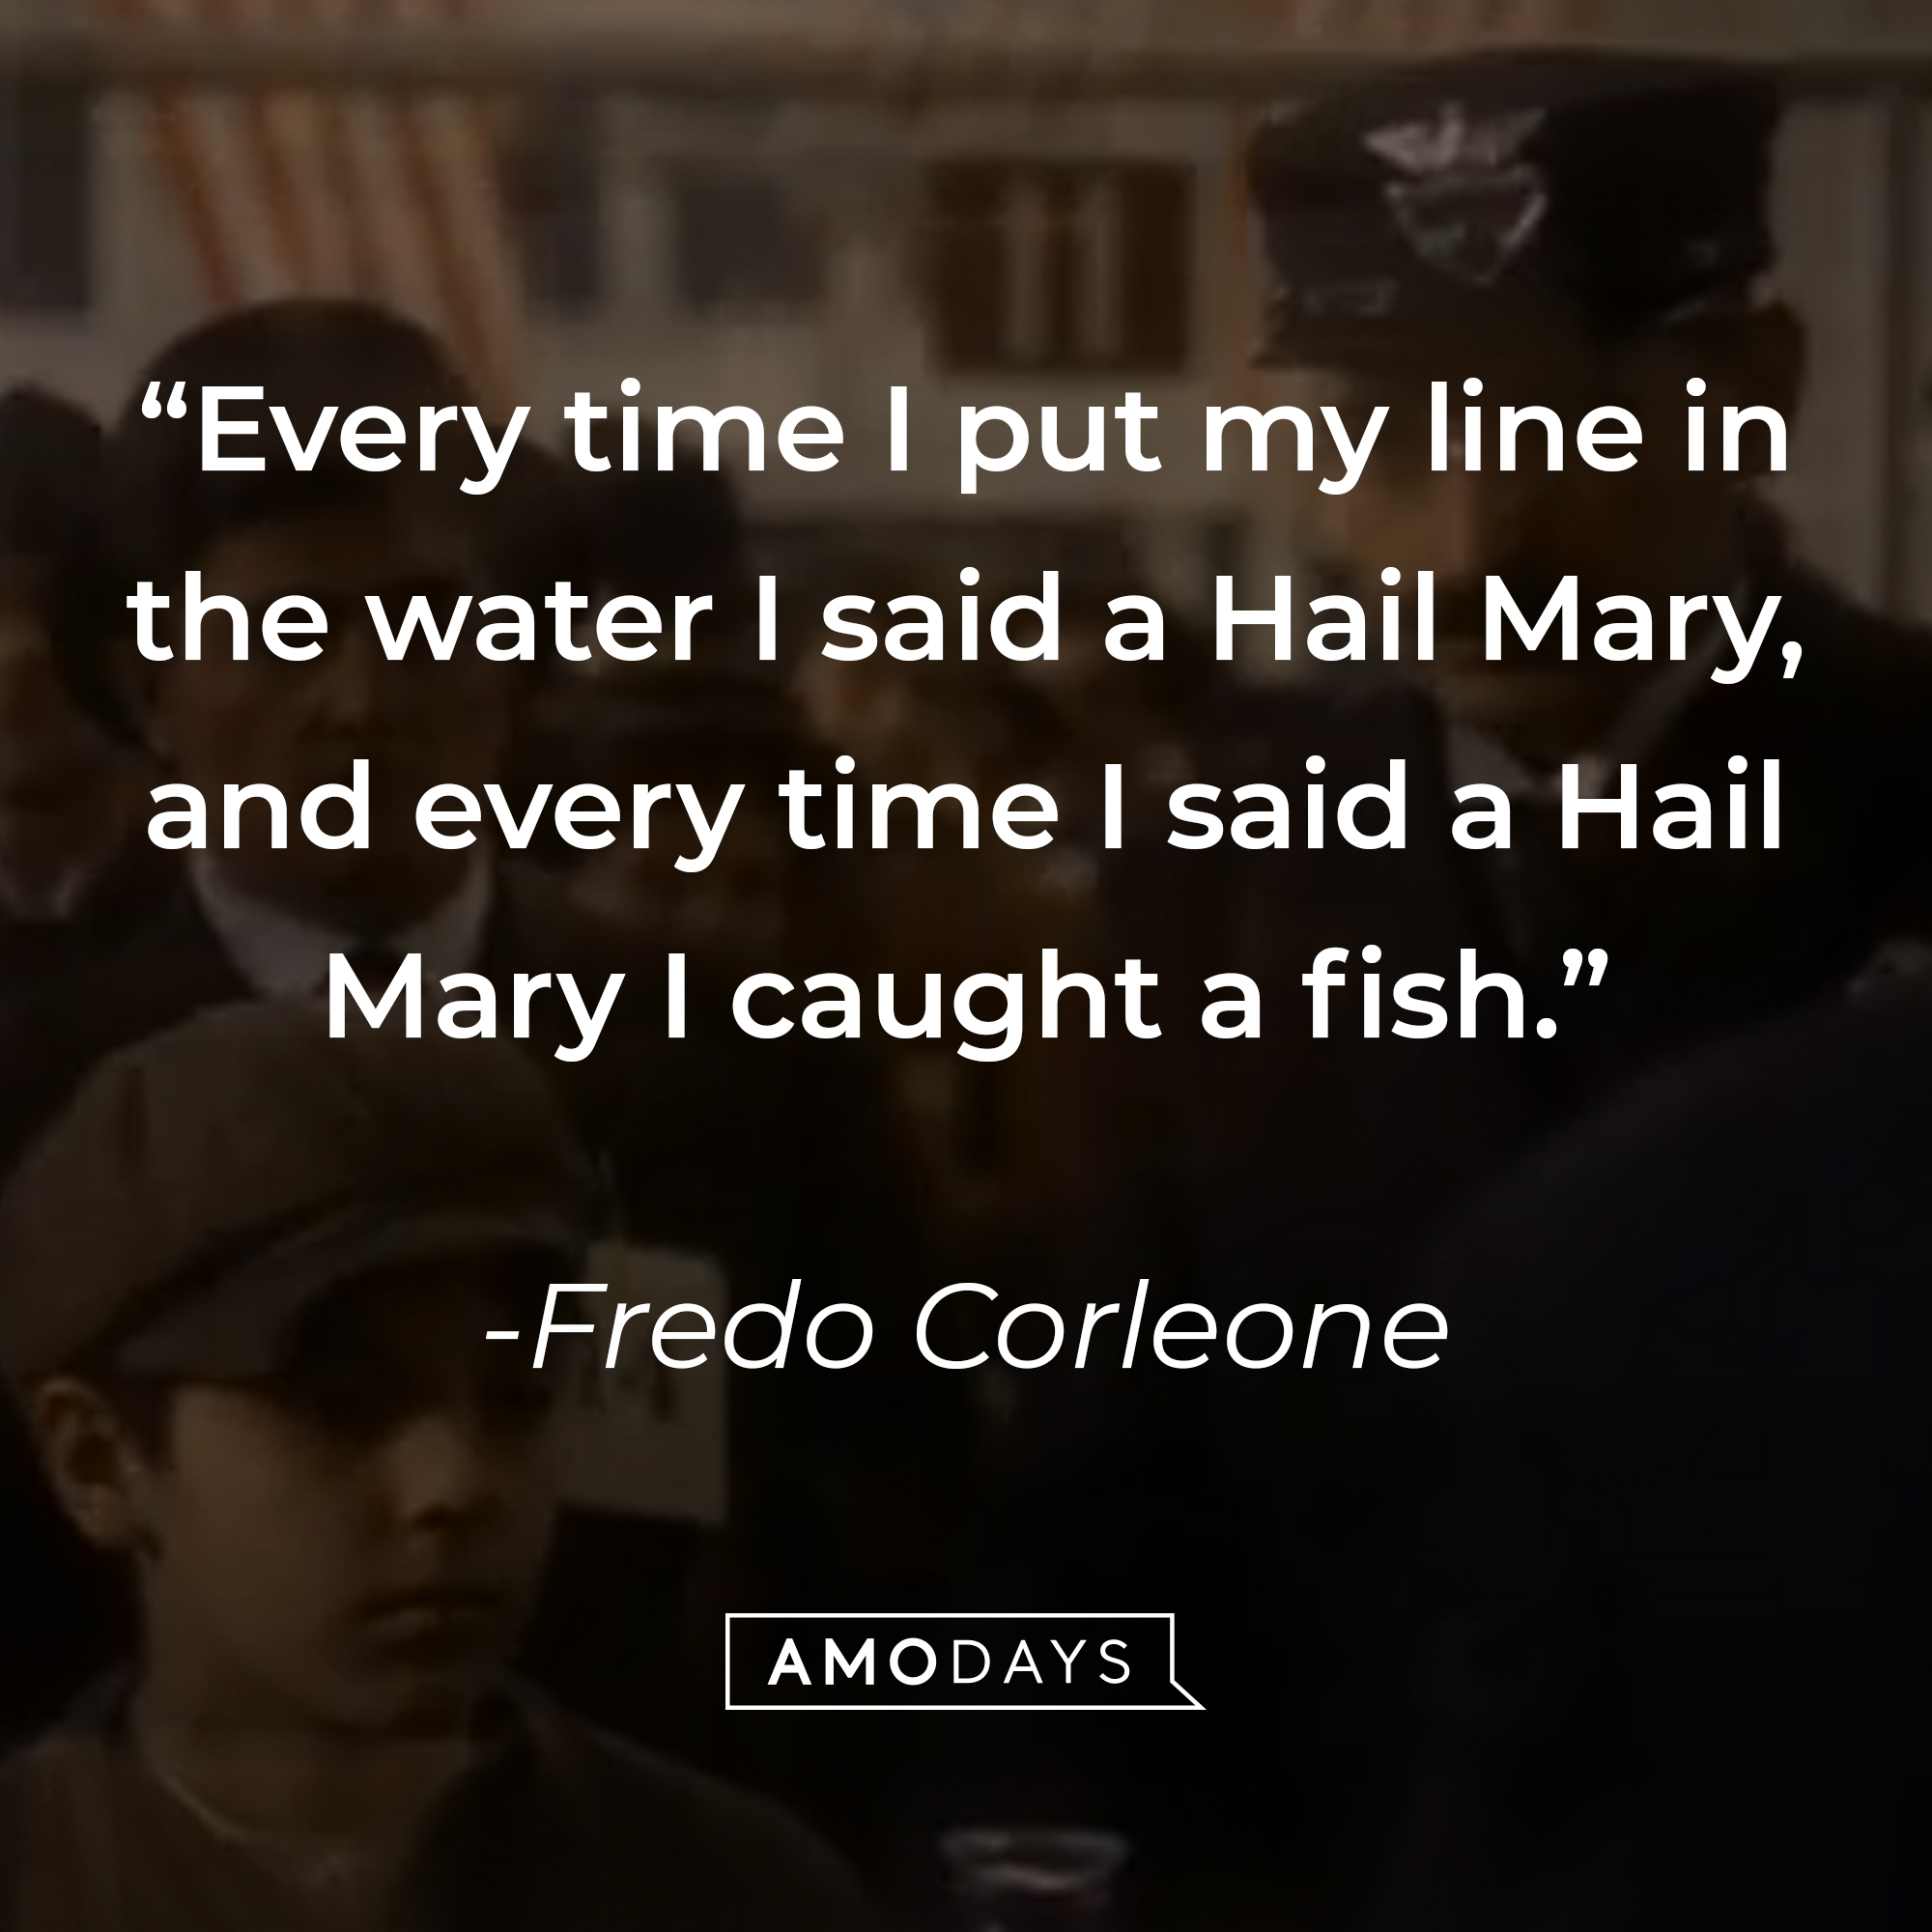 A photo from "The Godfather PartII" With the quote, "Every time I put my line in the water I said a Hail Mary, and every time I said a Hail Mary I caught a fish." — Fredo Corleone | Source: YouTube/paramountmovies